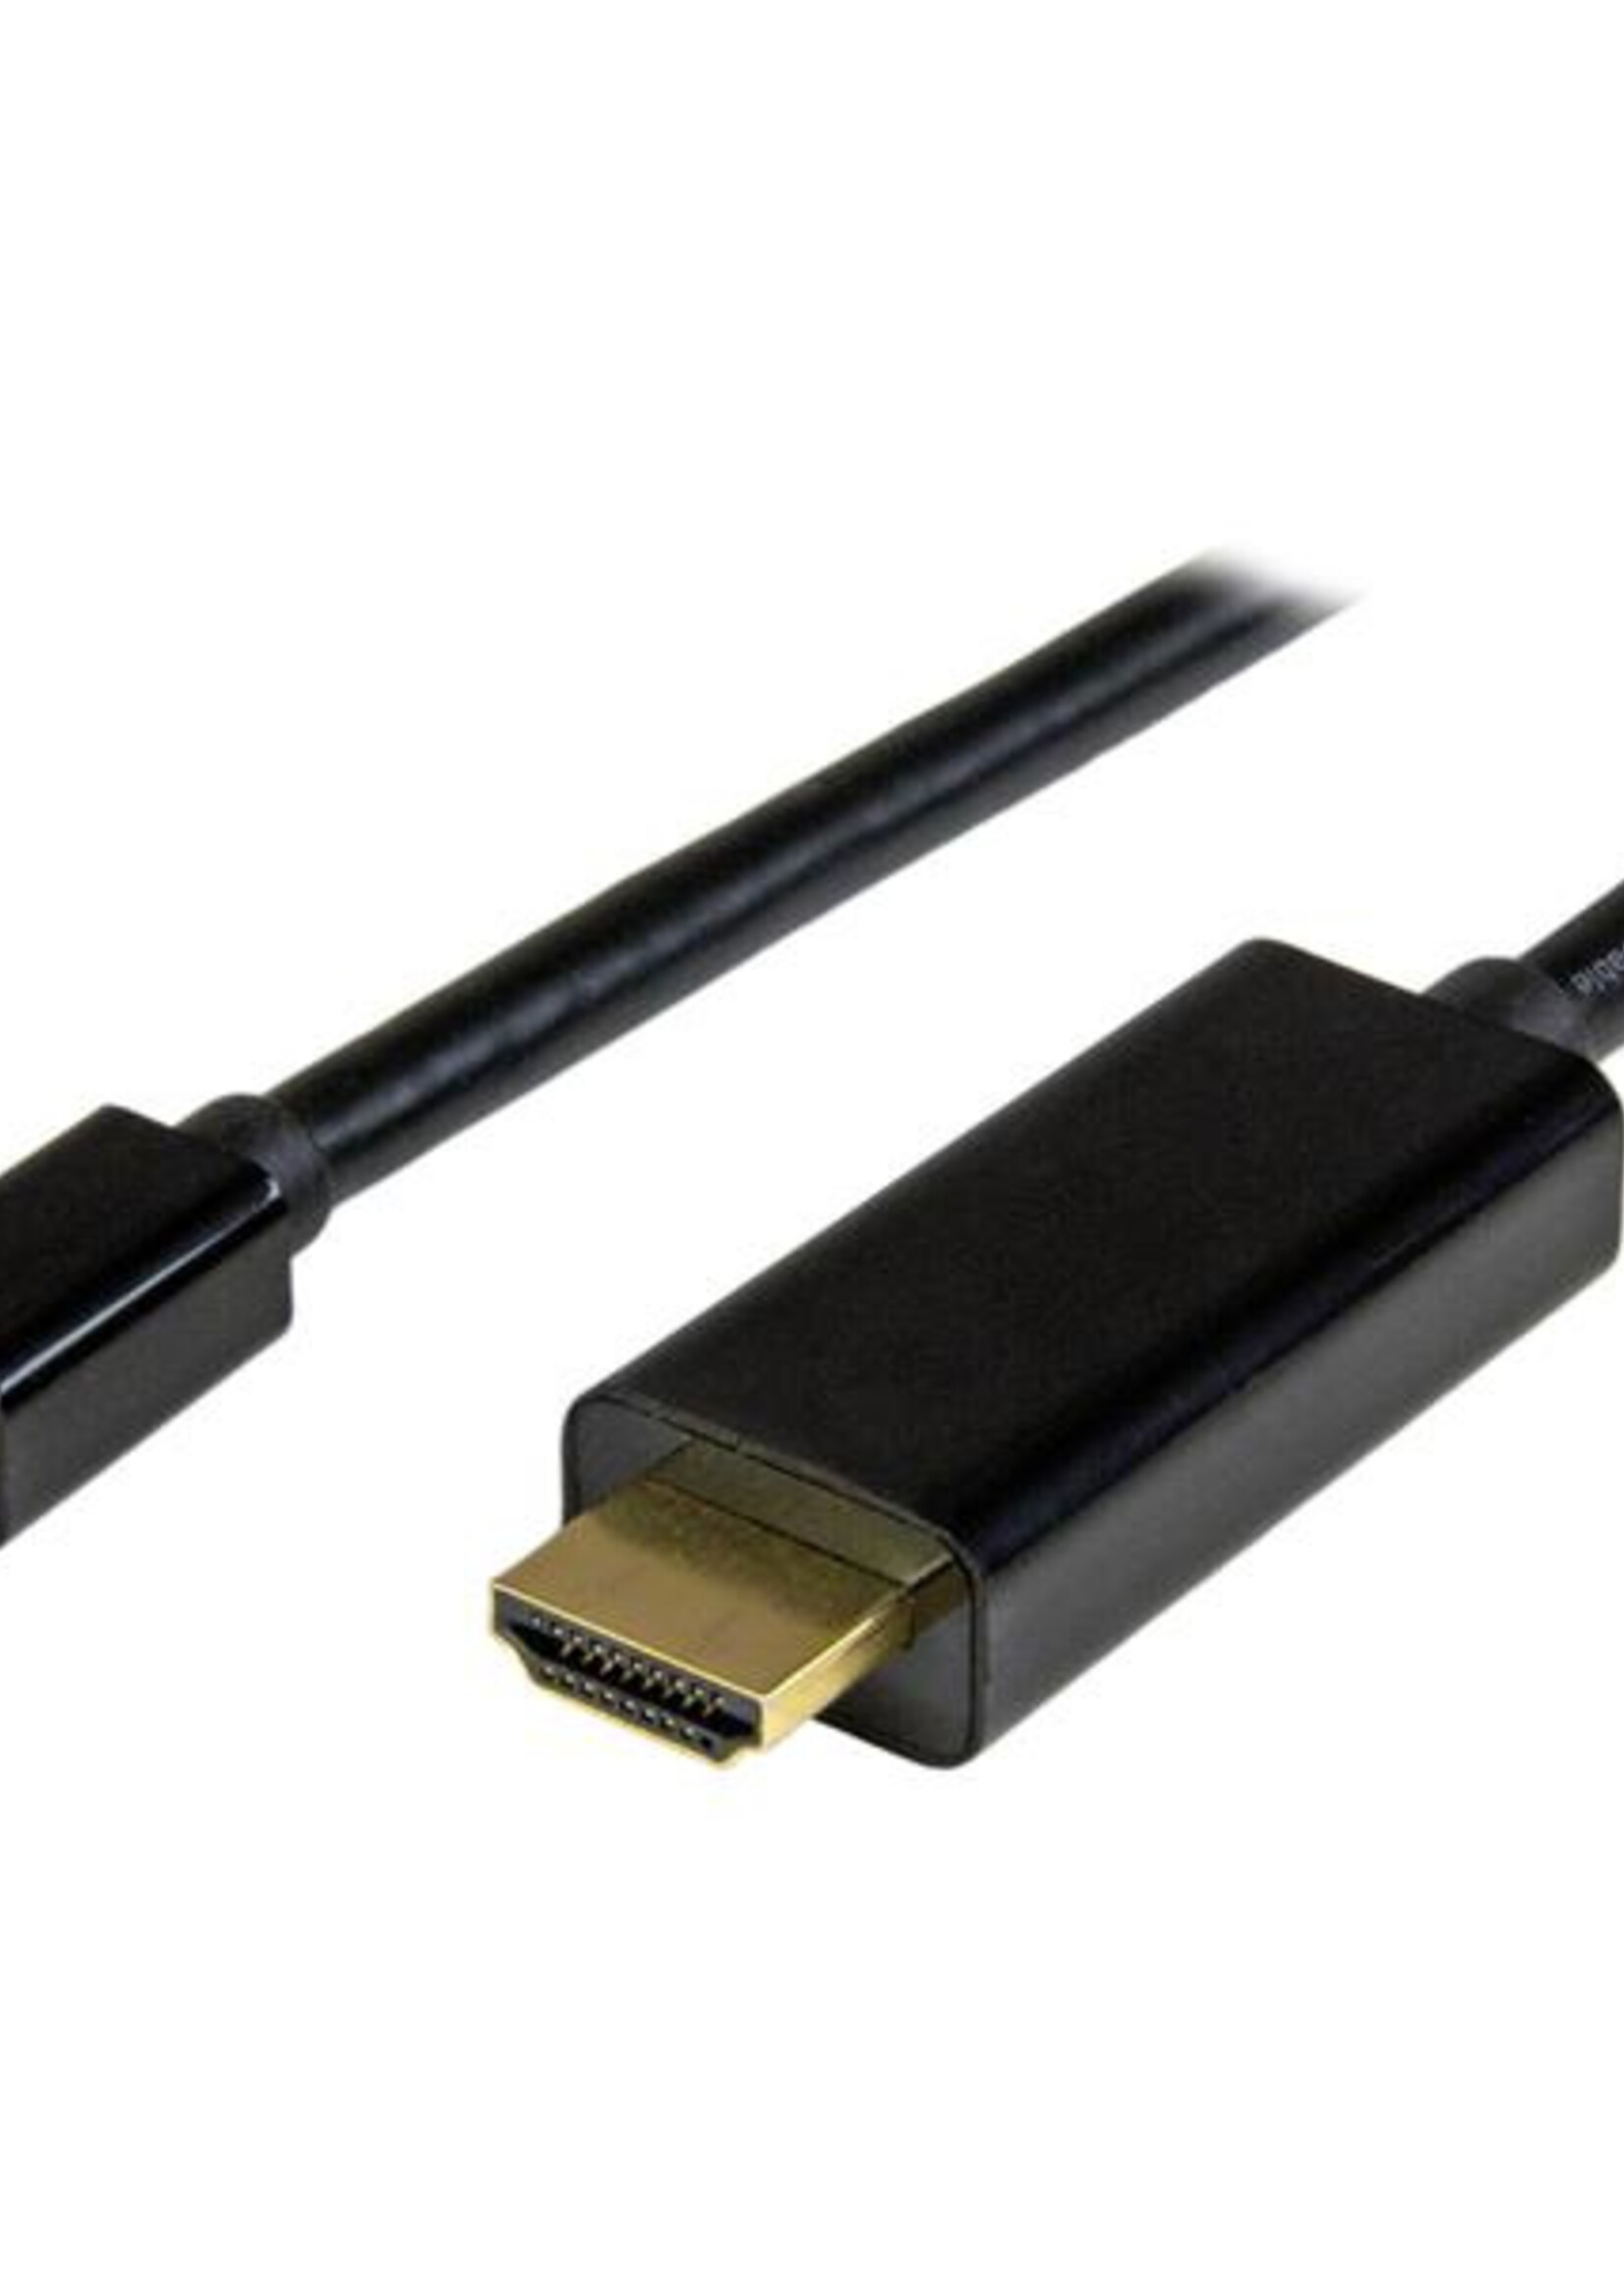 6 ft mDP to HDMI converter cable